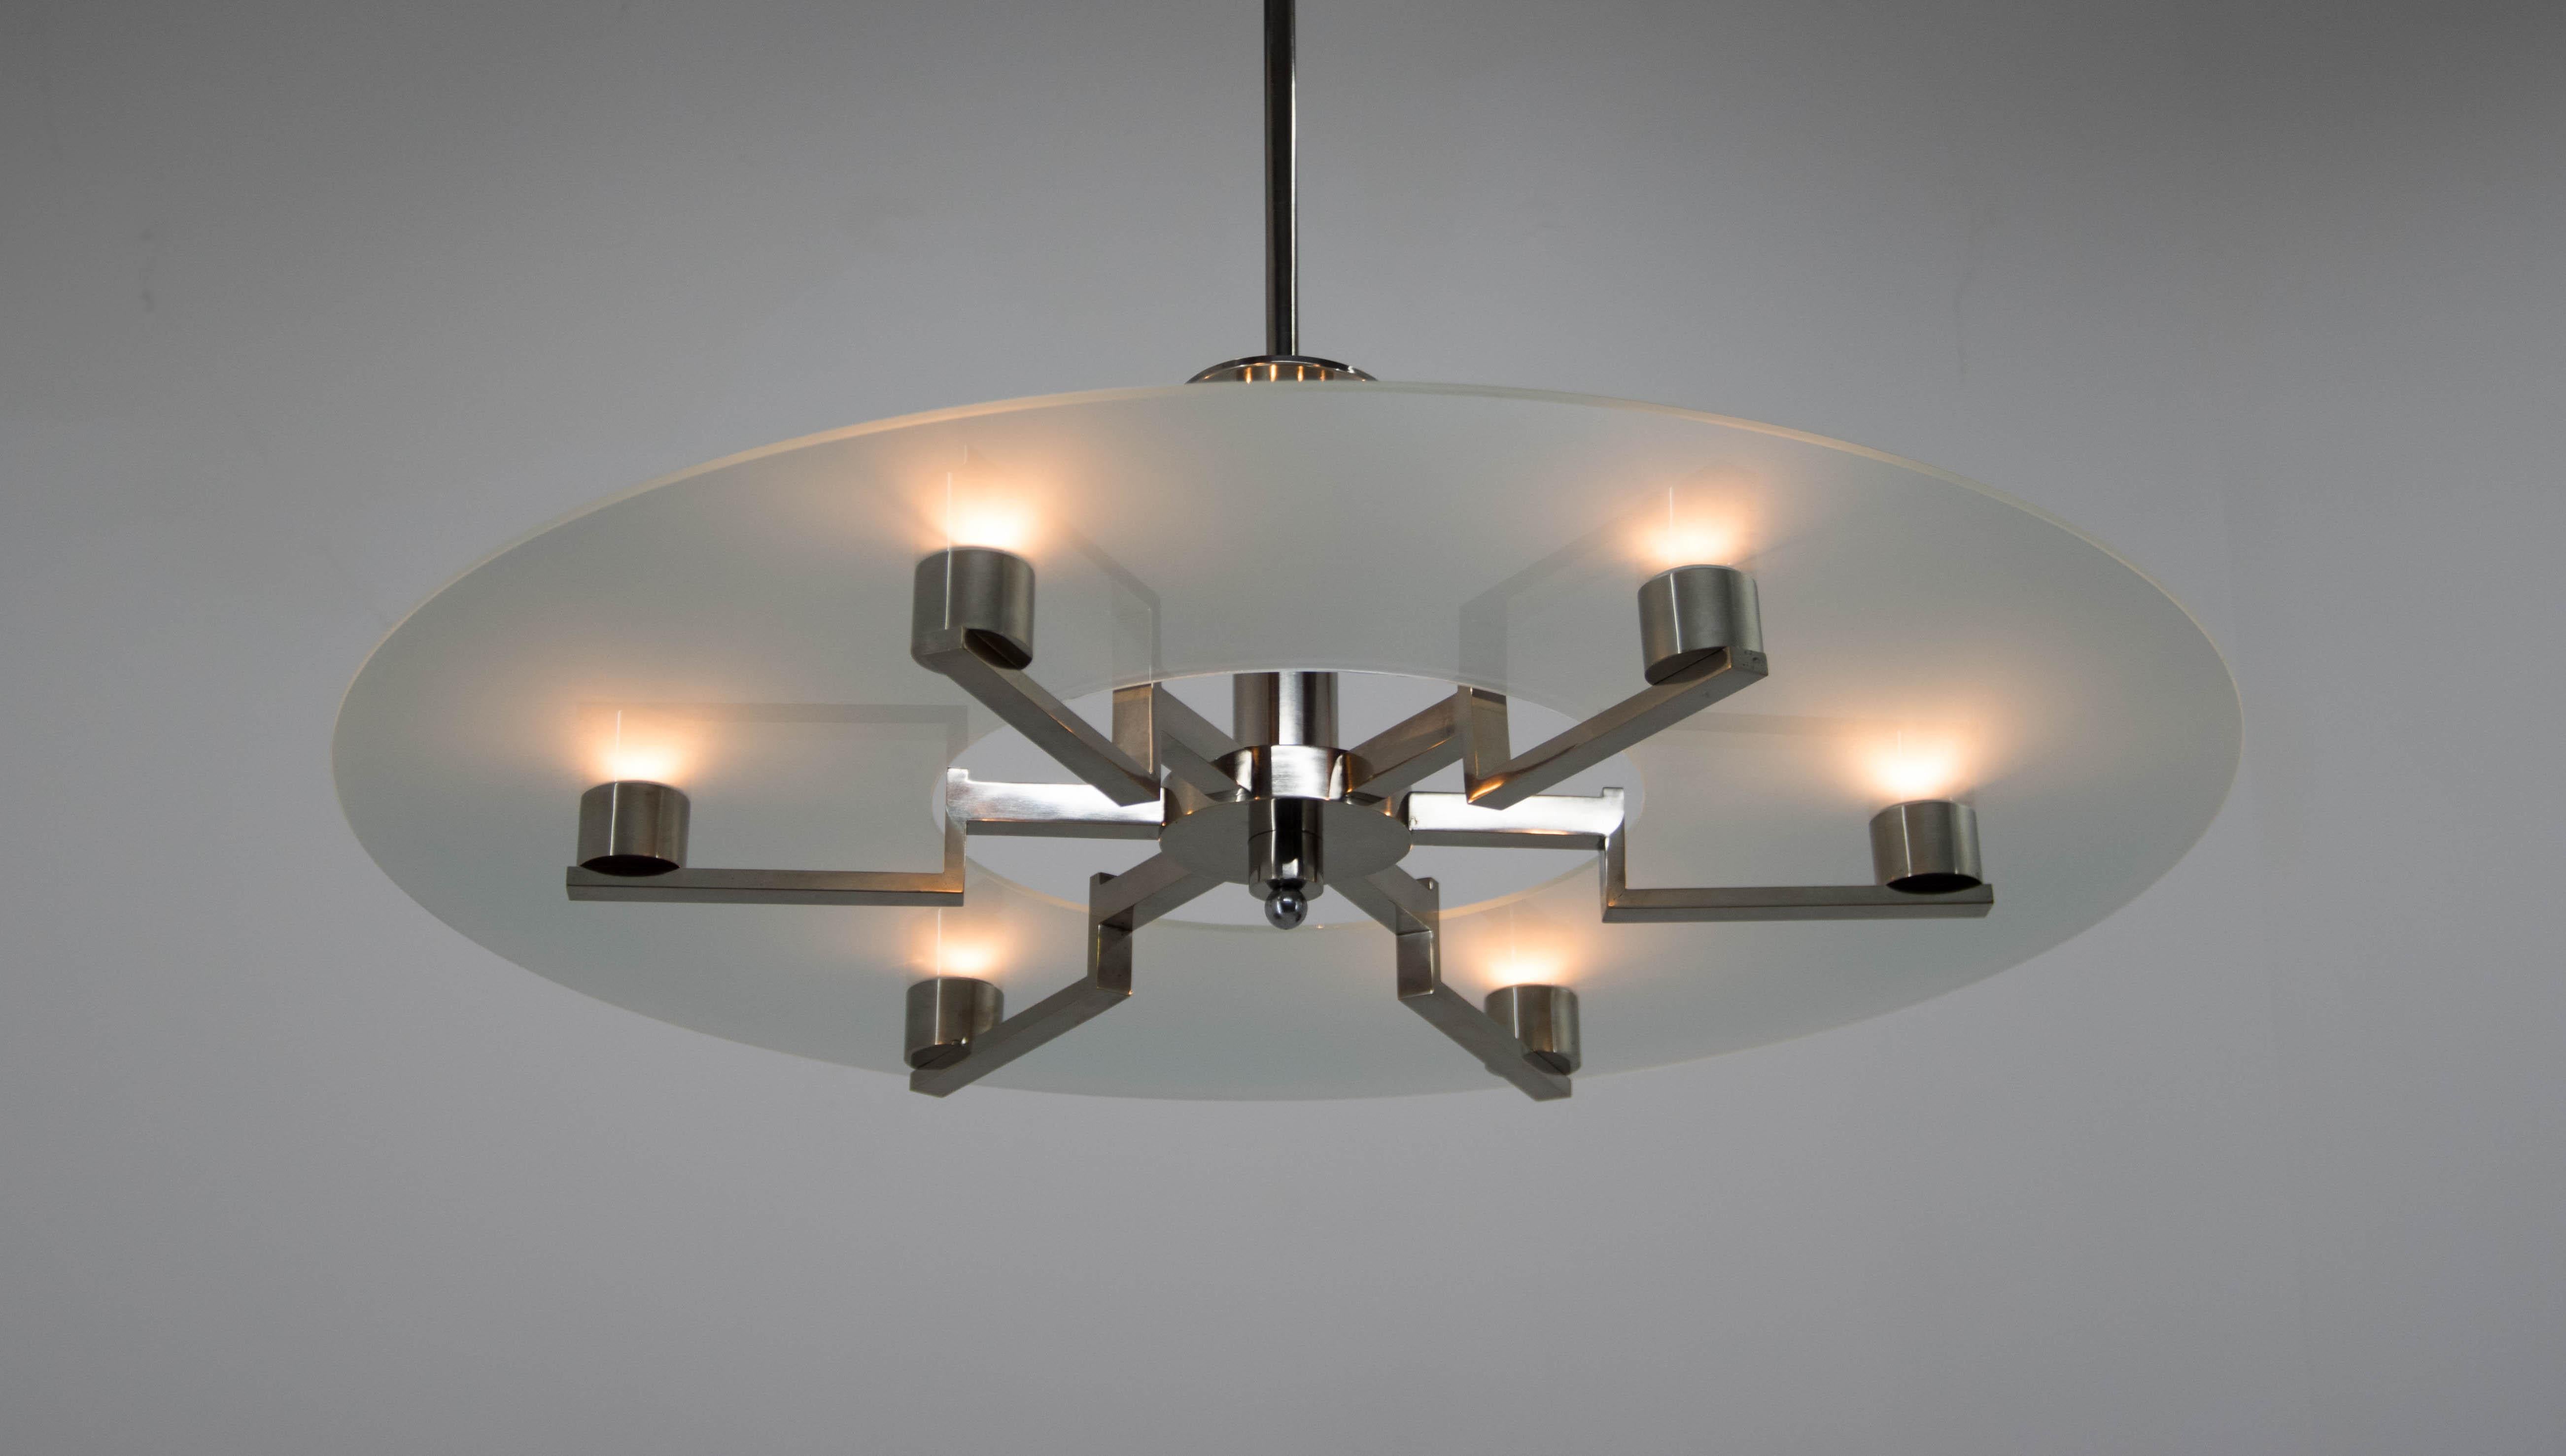 Czech Large Functionalist 6-Flamming Nickel-Plated Chandelier, 1930s For Sale